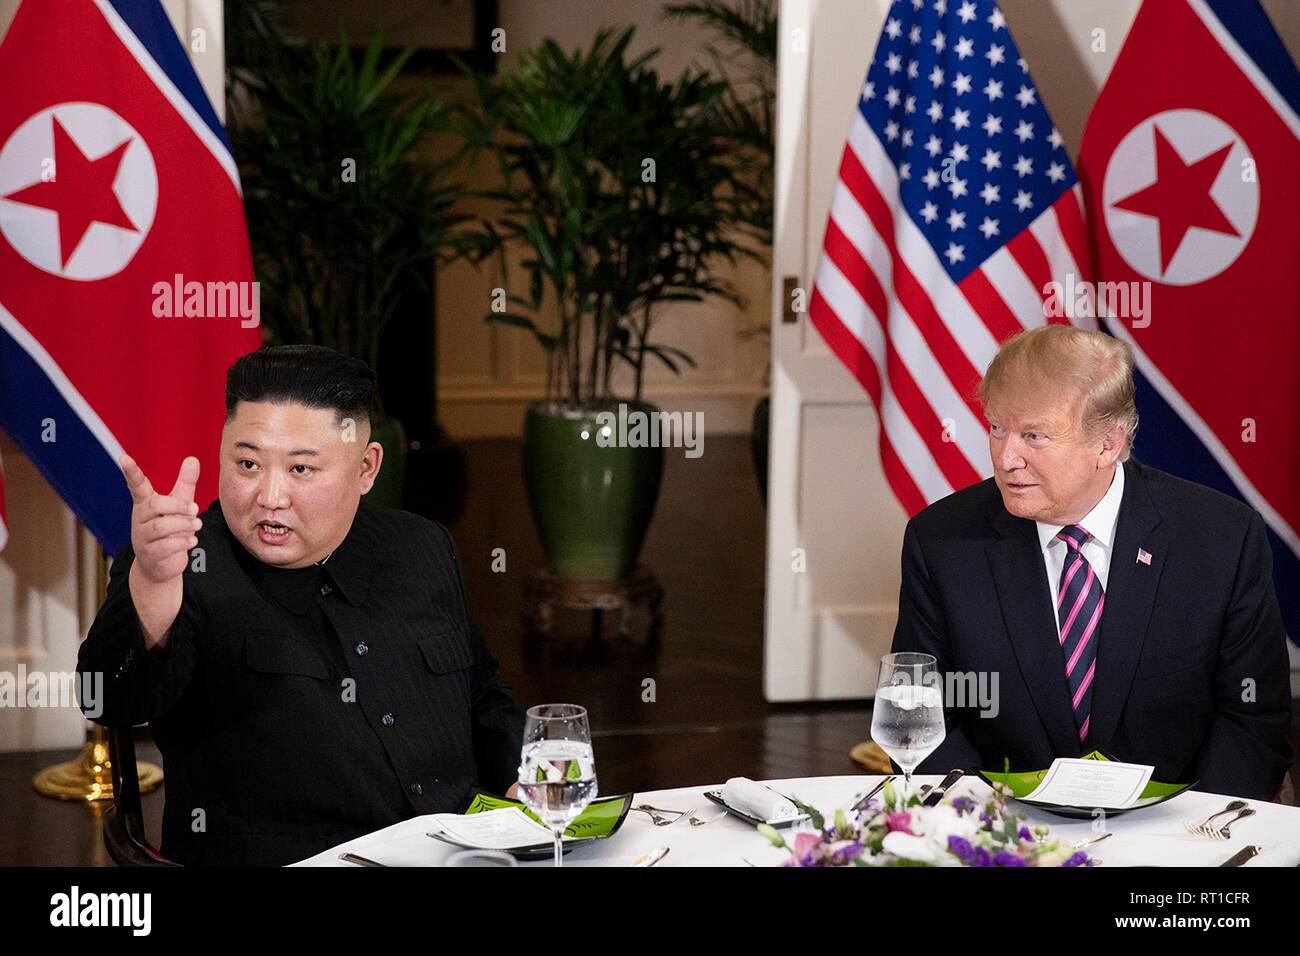 Hanoi, Vietnam. 27th Feb, 2019. U.S President Donald Trump and North Korean leader and Kim Jong Un sit together during a social dinner at the Sofitel Legend Metropole hotel February 27, 2019 in Hanoi, Vietnam. Credit: Planetpix/Alamy Live News Stock Photo